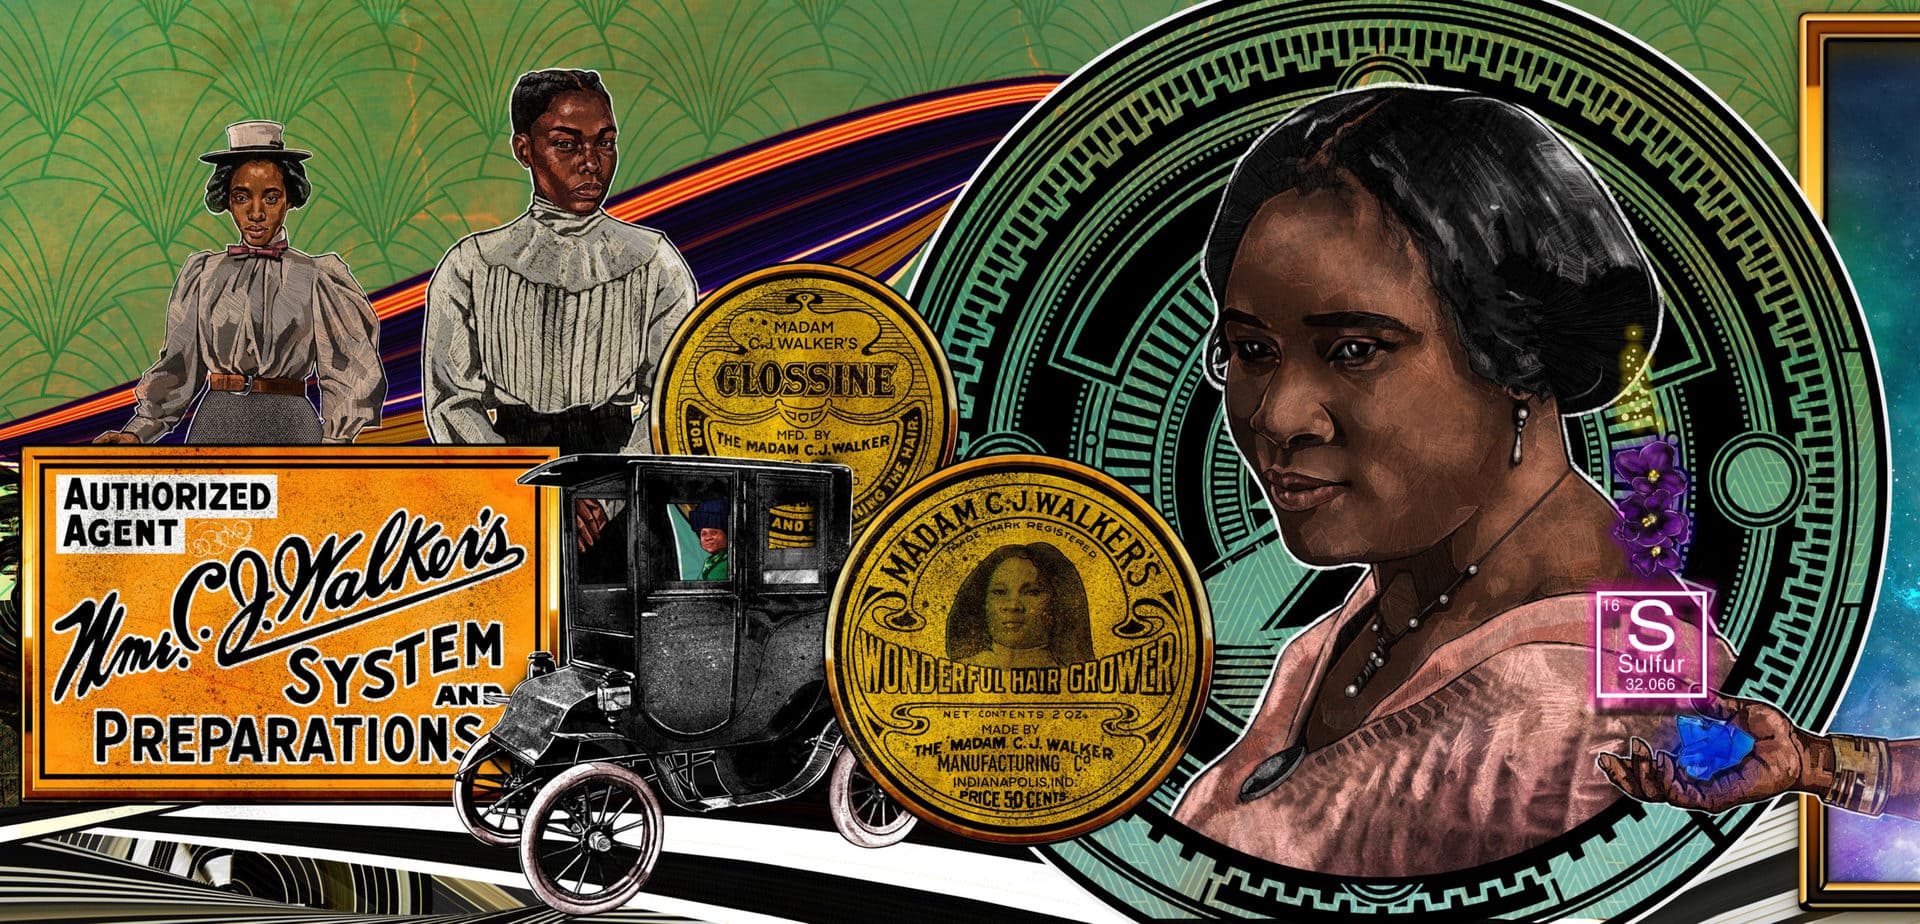 artwork created to honor madam cj walker with portraits of walker and two other black women